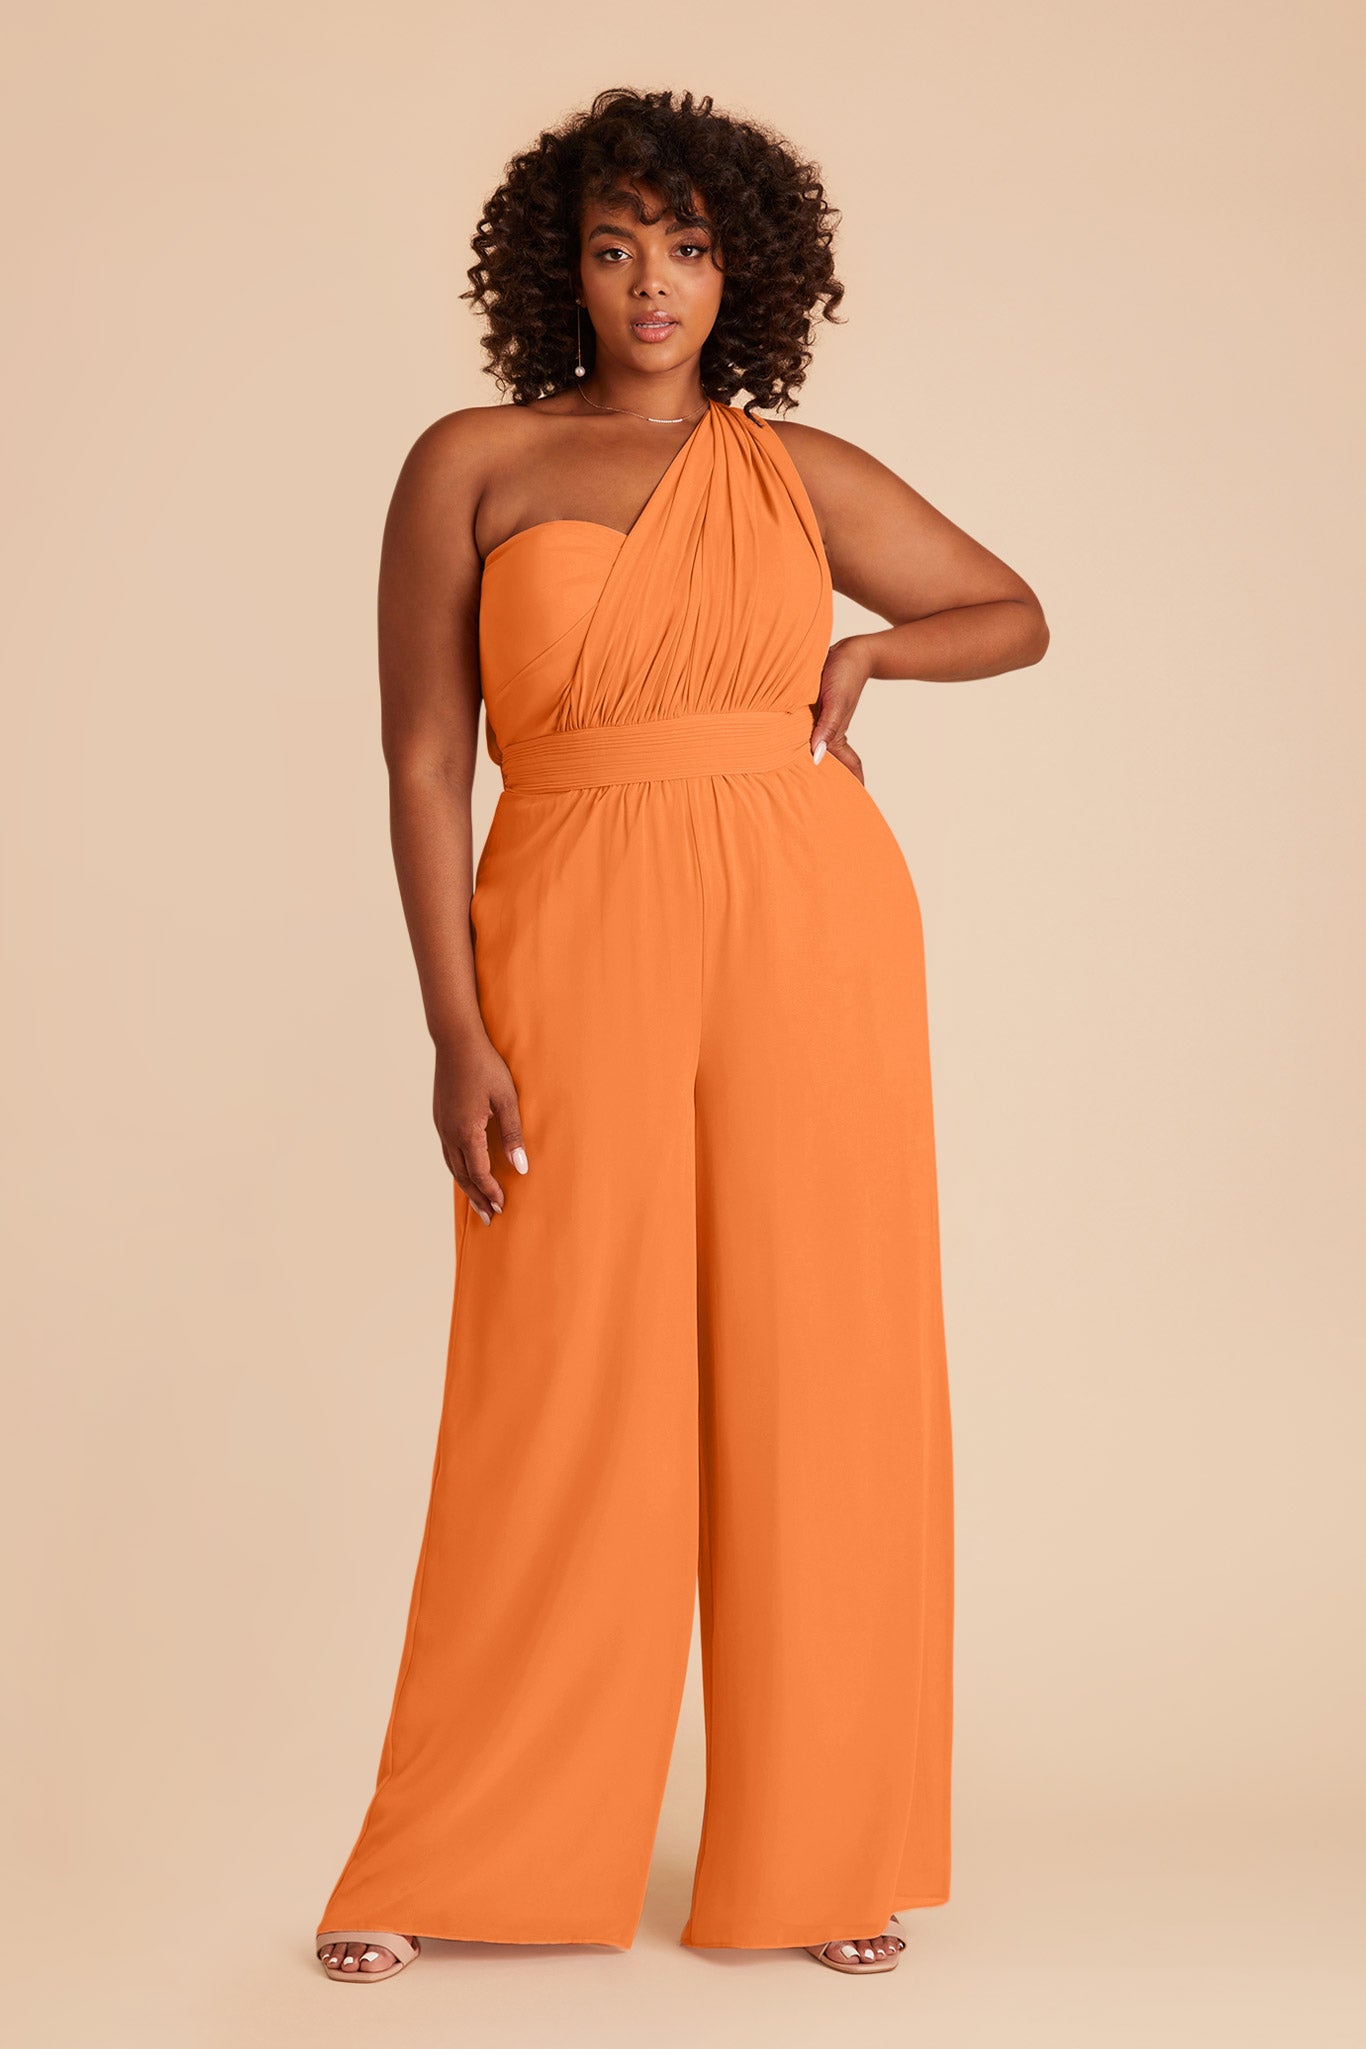 Apricot Gigi Convertible Jumpsuit by Birdy Grey